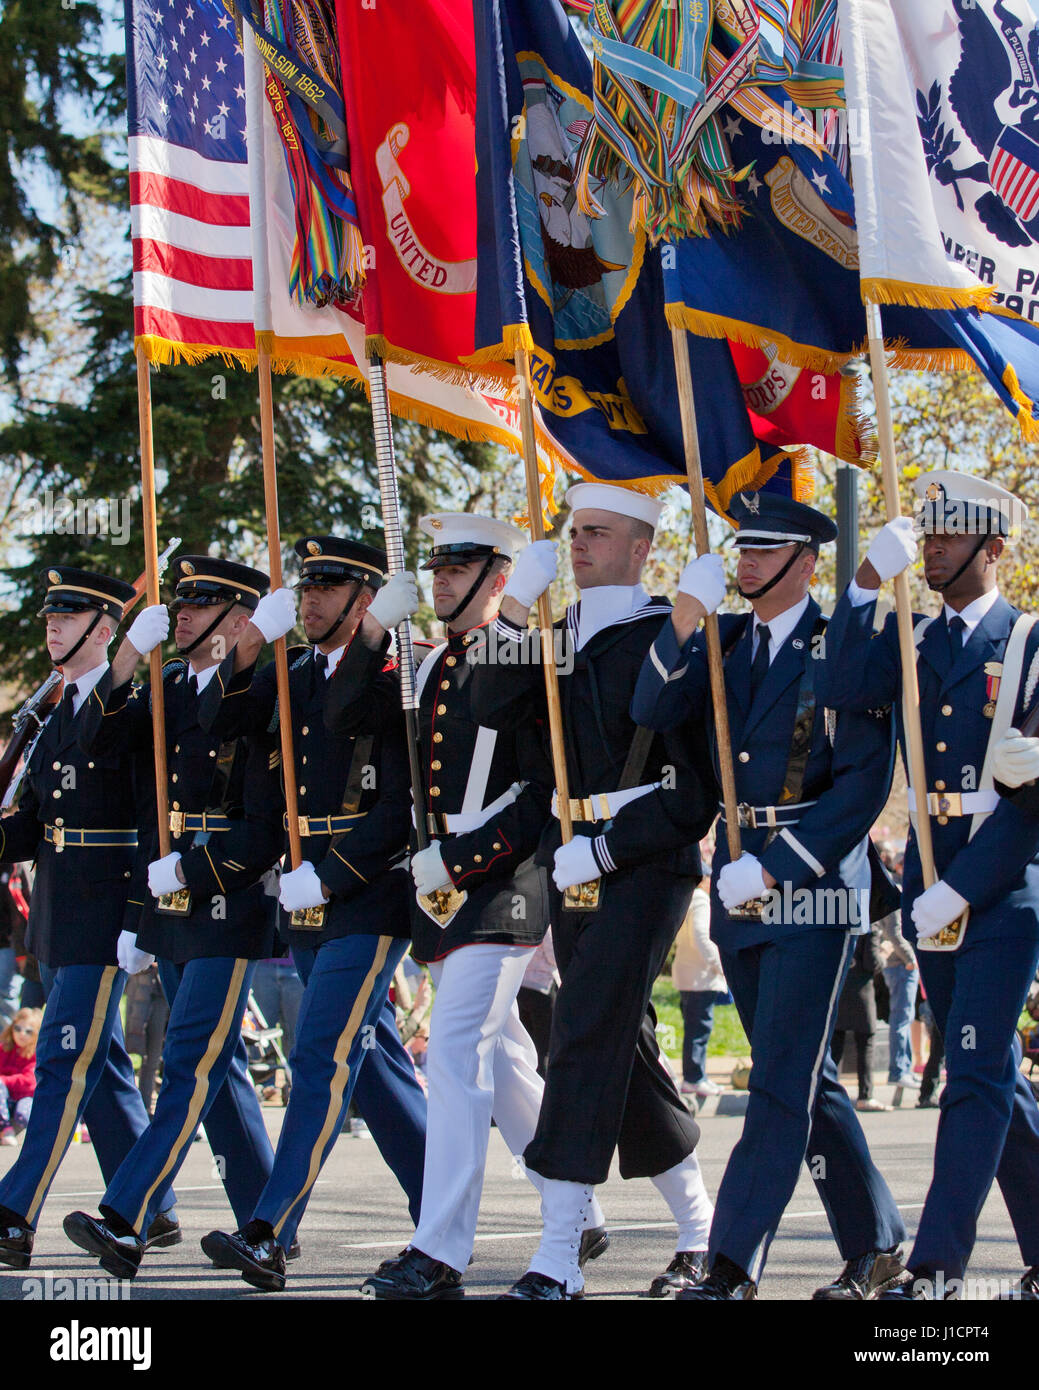 Joint Service Color Guard (honor guard) marching in parade - USA Stock Photo